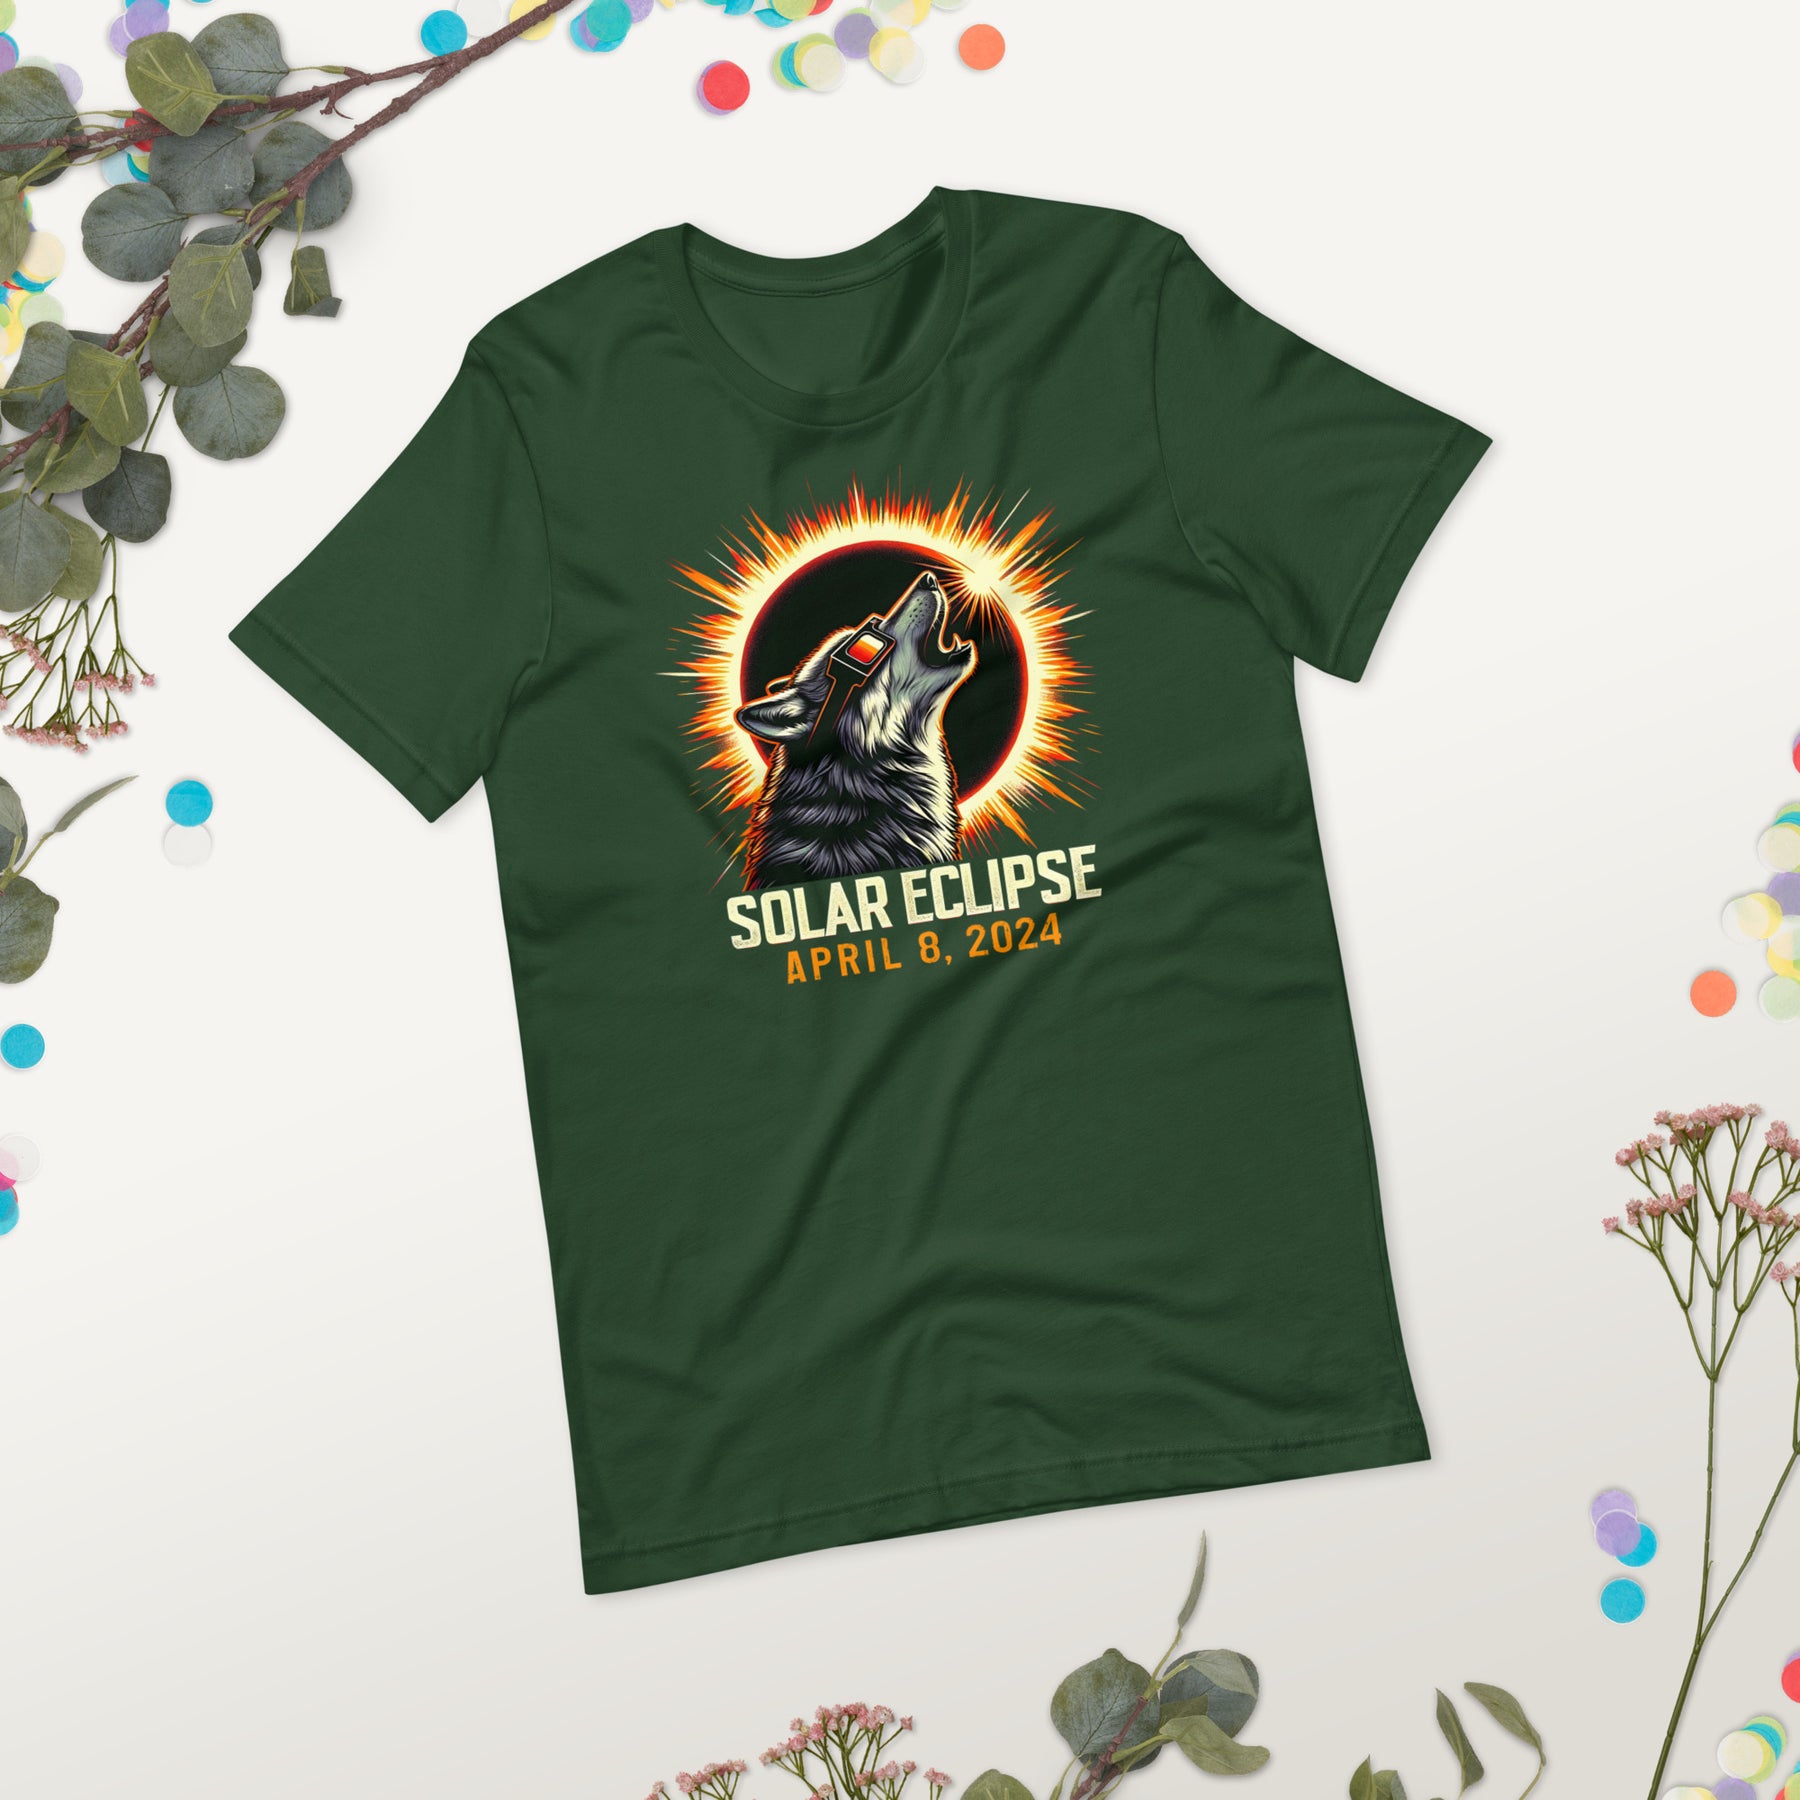 Howling Wolf Moon Shirt for Total Solar Eclipse April 8, 2024, Totality Eclipse Souvenir, Dog Lover Gift